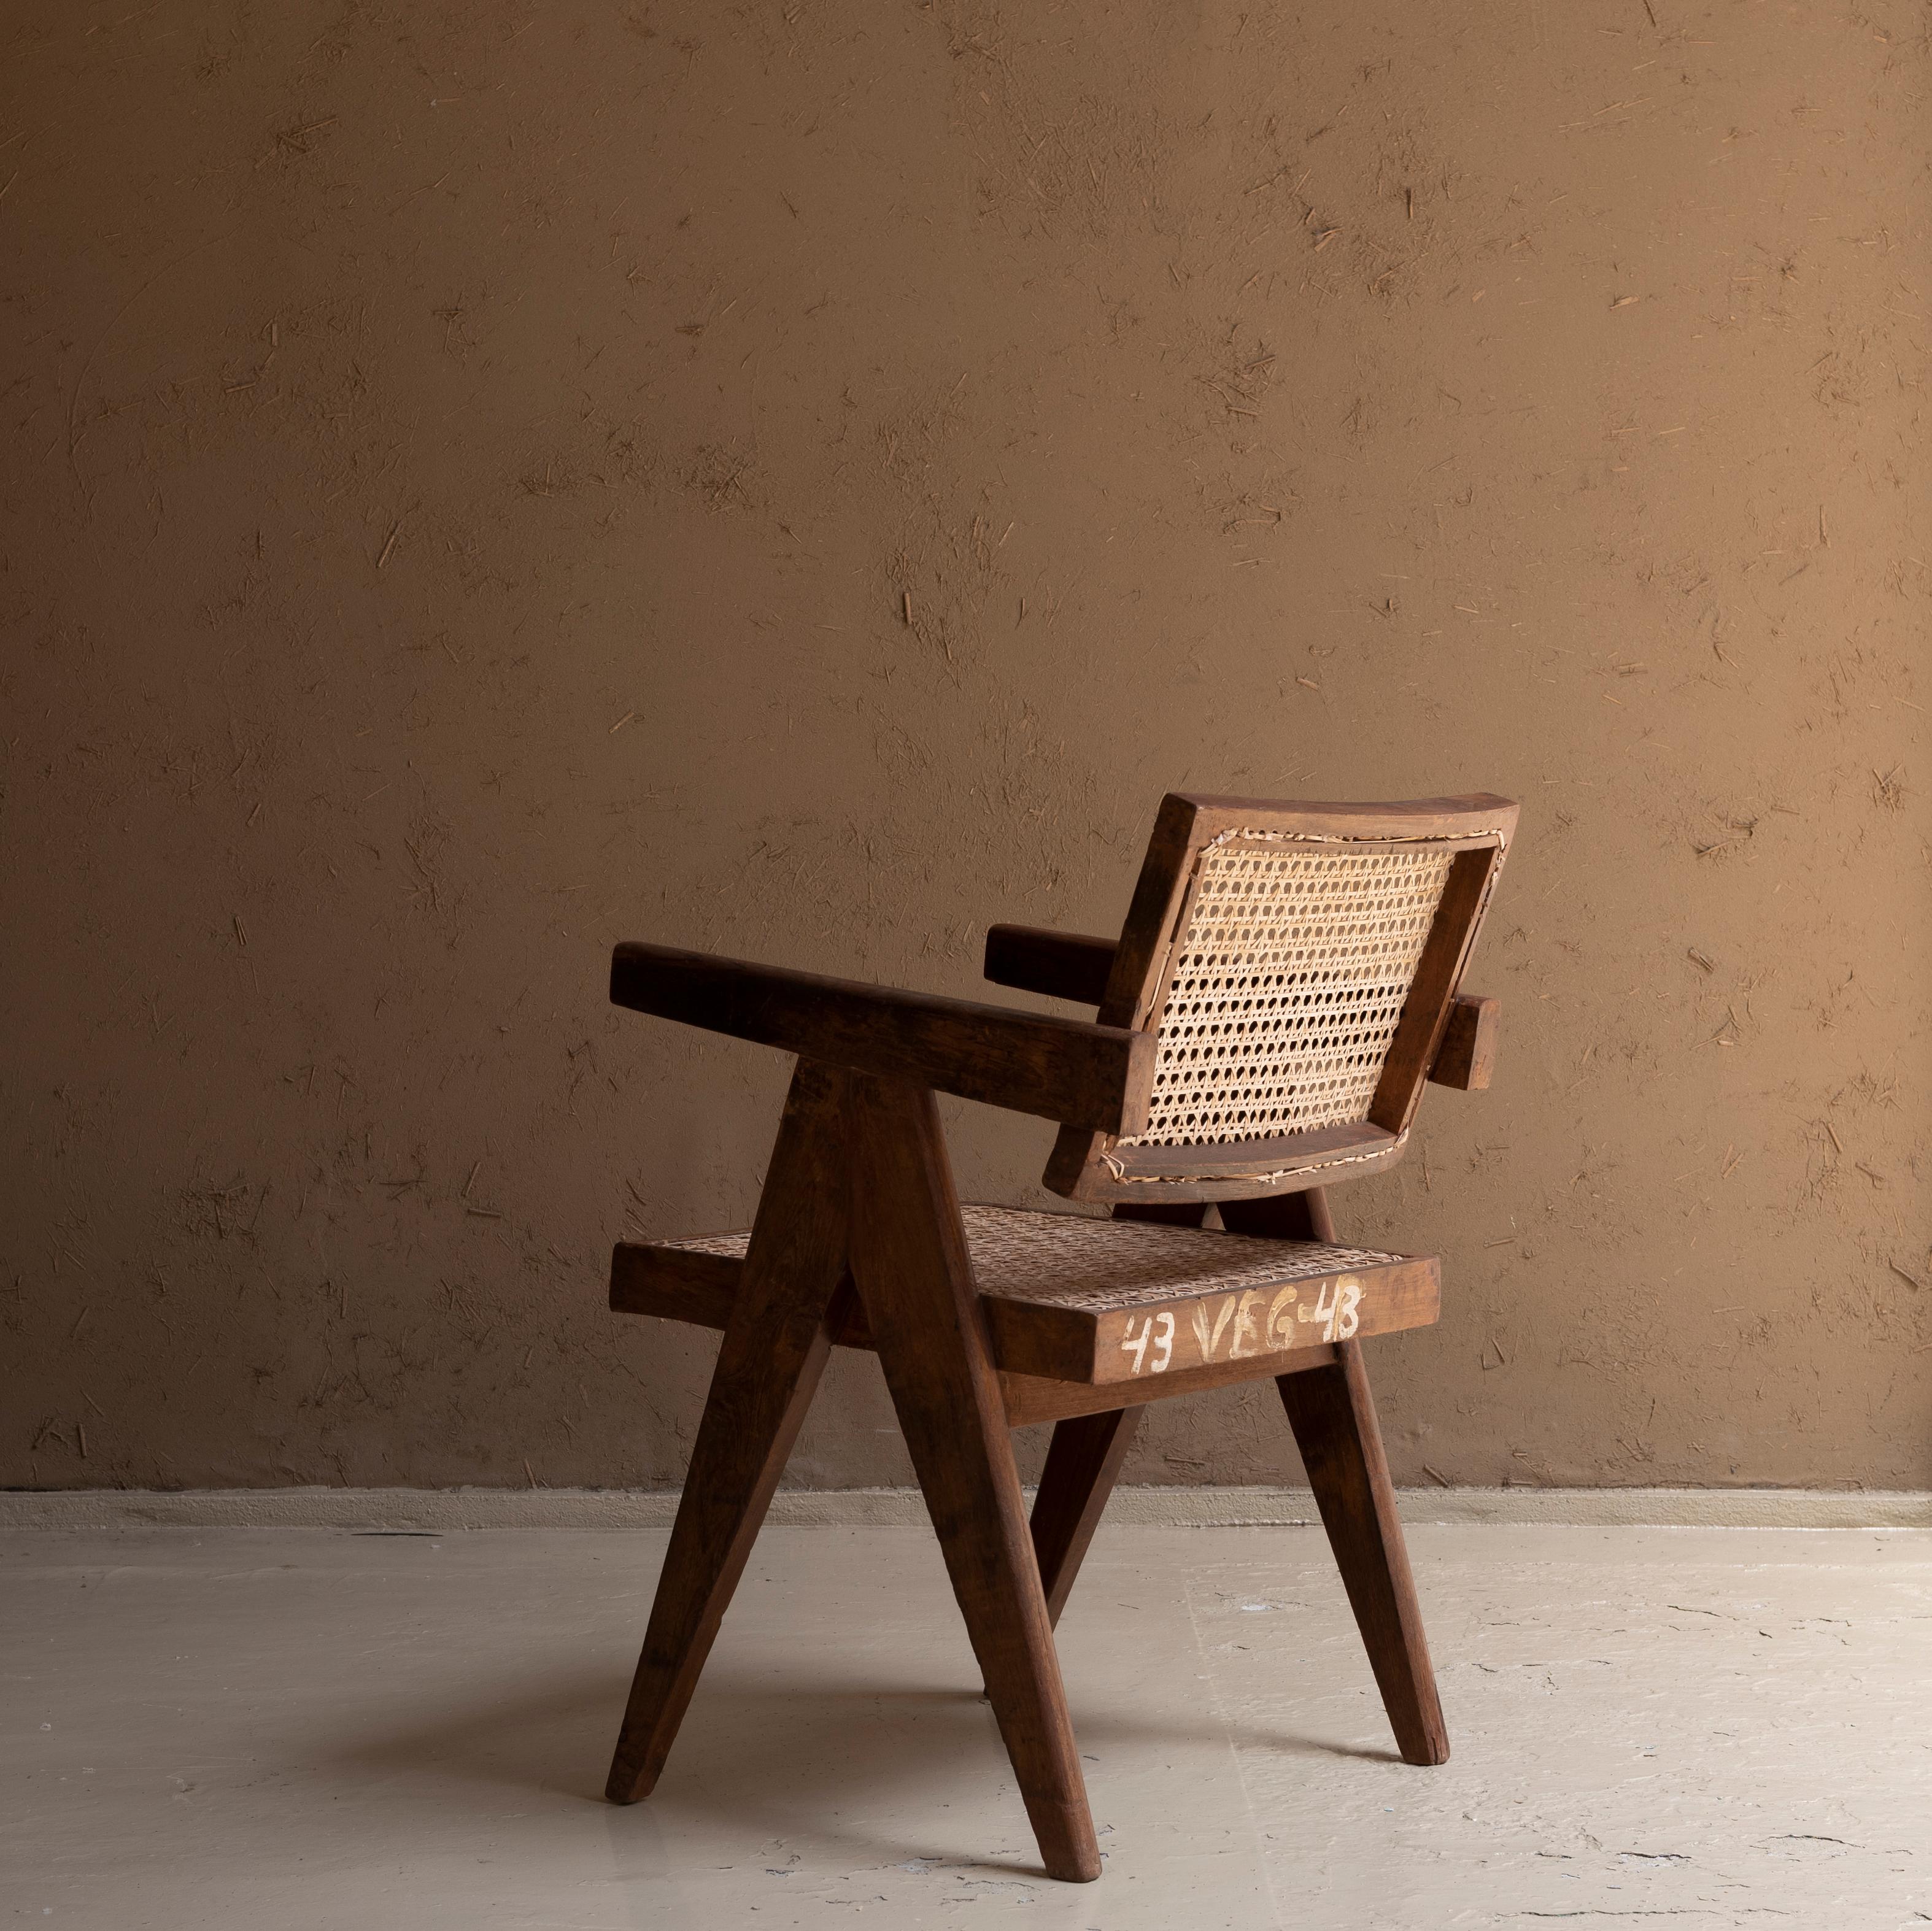 Pierre Jeanneret Office Chair, Circa 1955-56, Chandigarh, India In Good Condition For Sale In Edogawa-ku Tokyo, JP